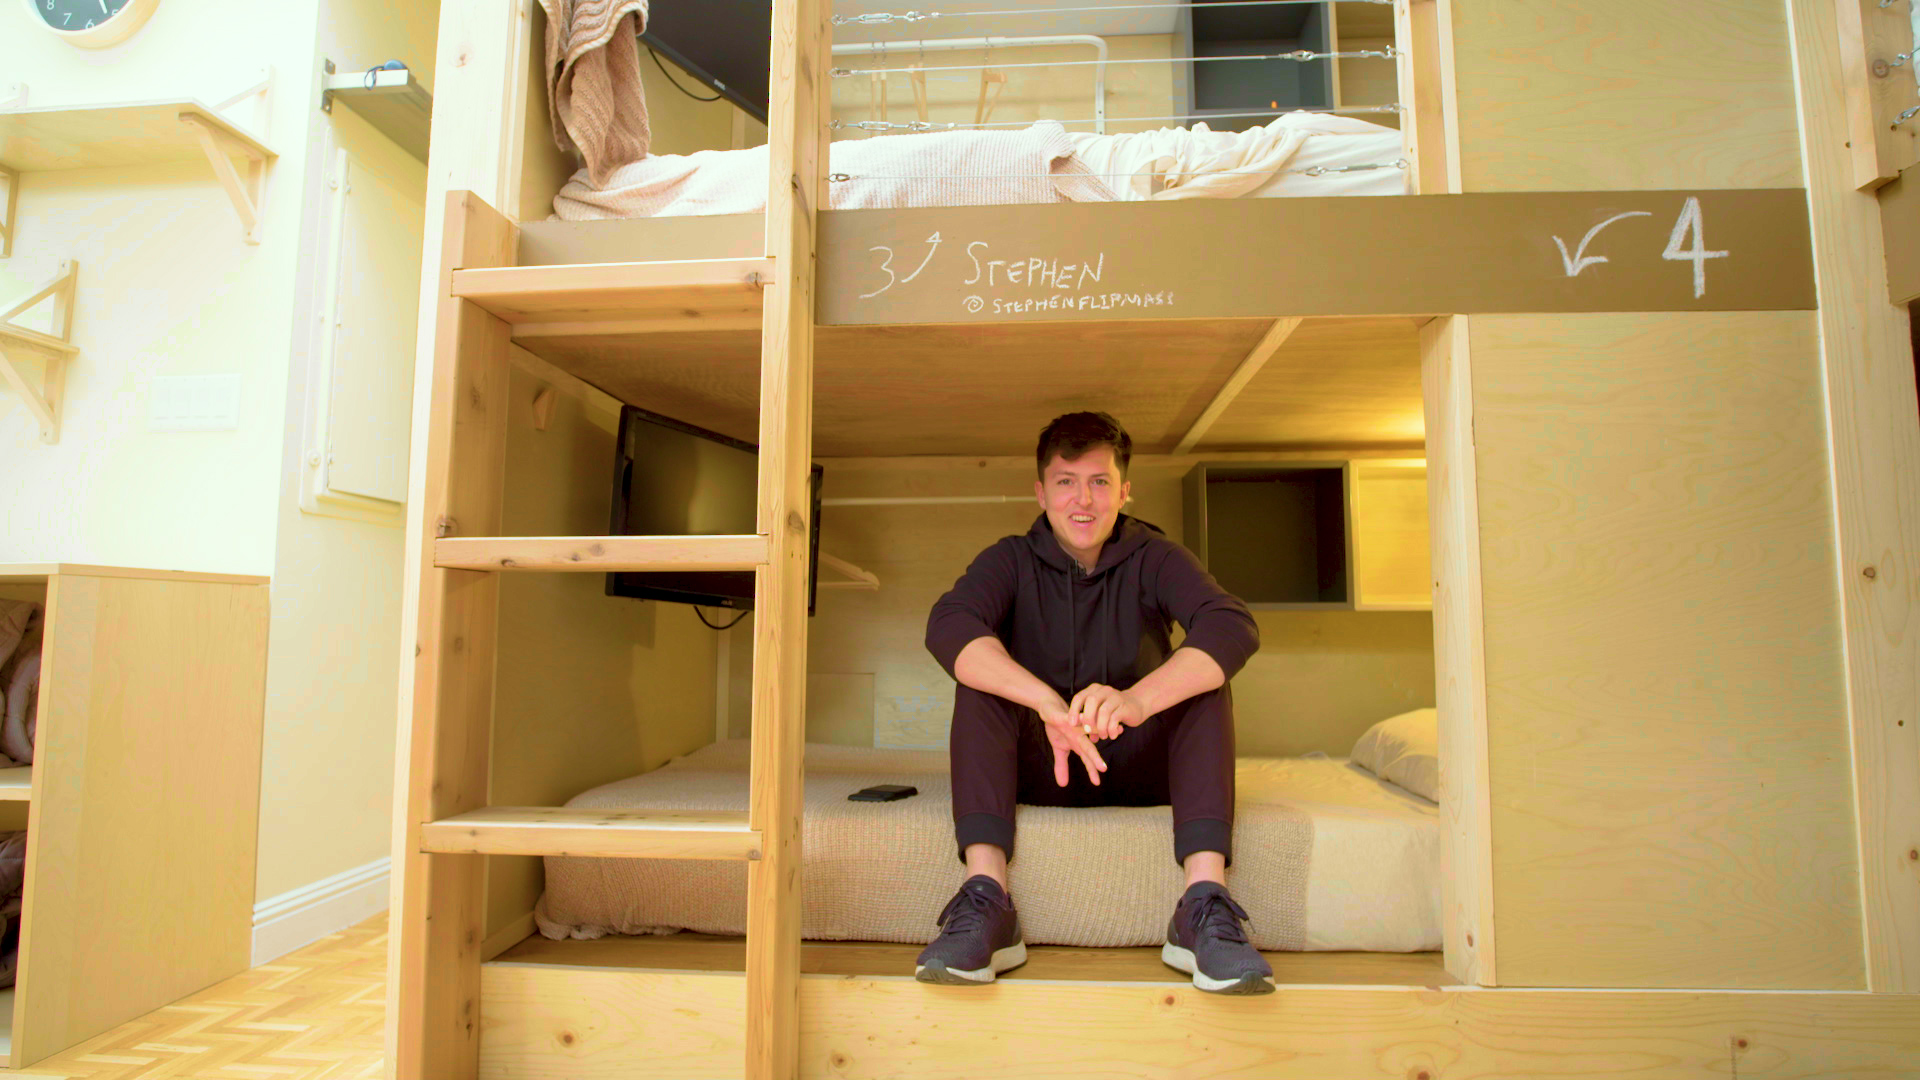 This Bunk Bed In San Francisco S, Bunk Beds Monthly Payments